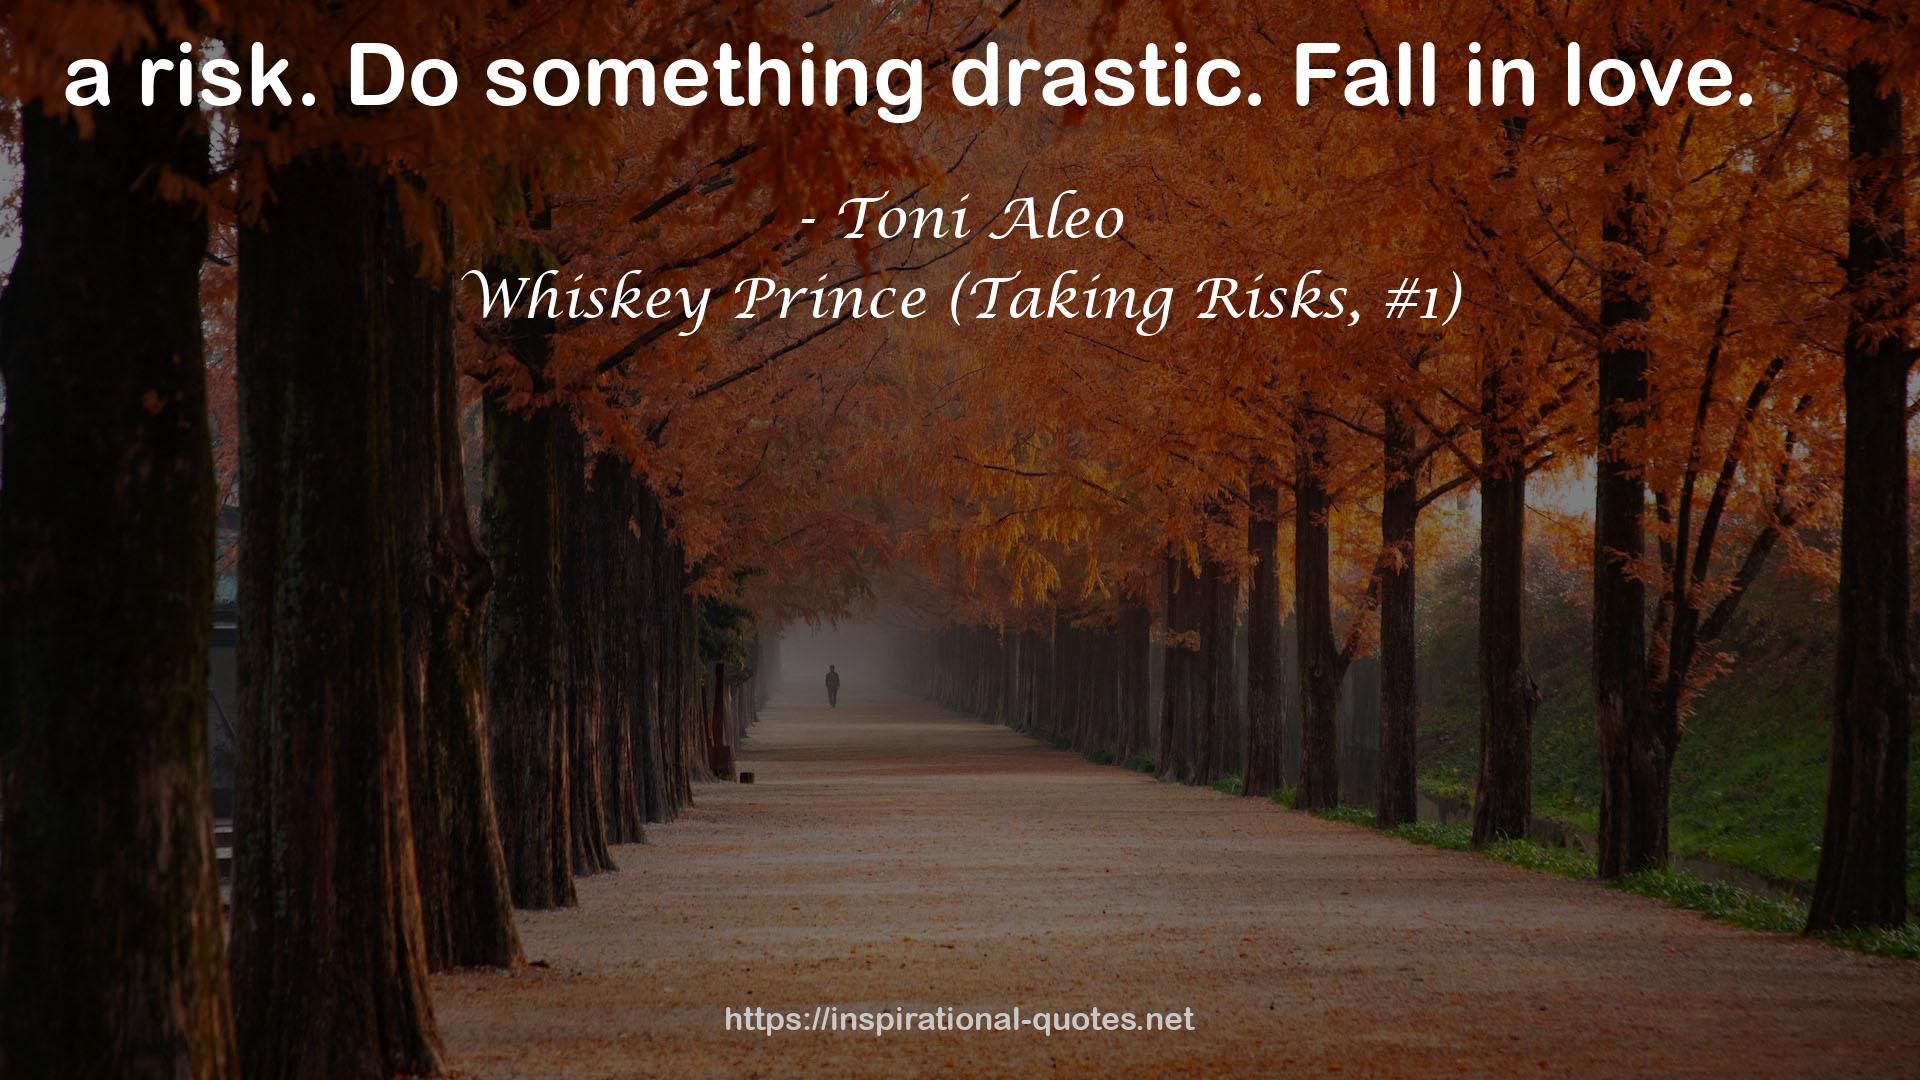 Whiskey Prince (Taking Risks, #1) QUOTES